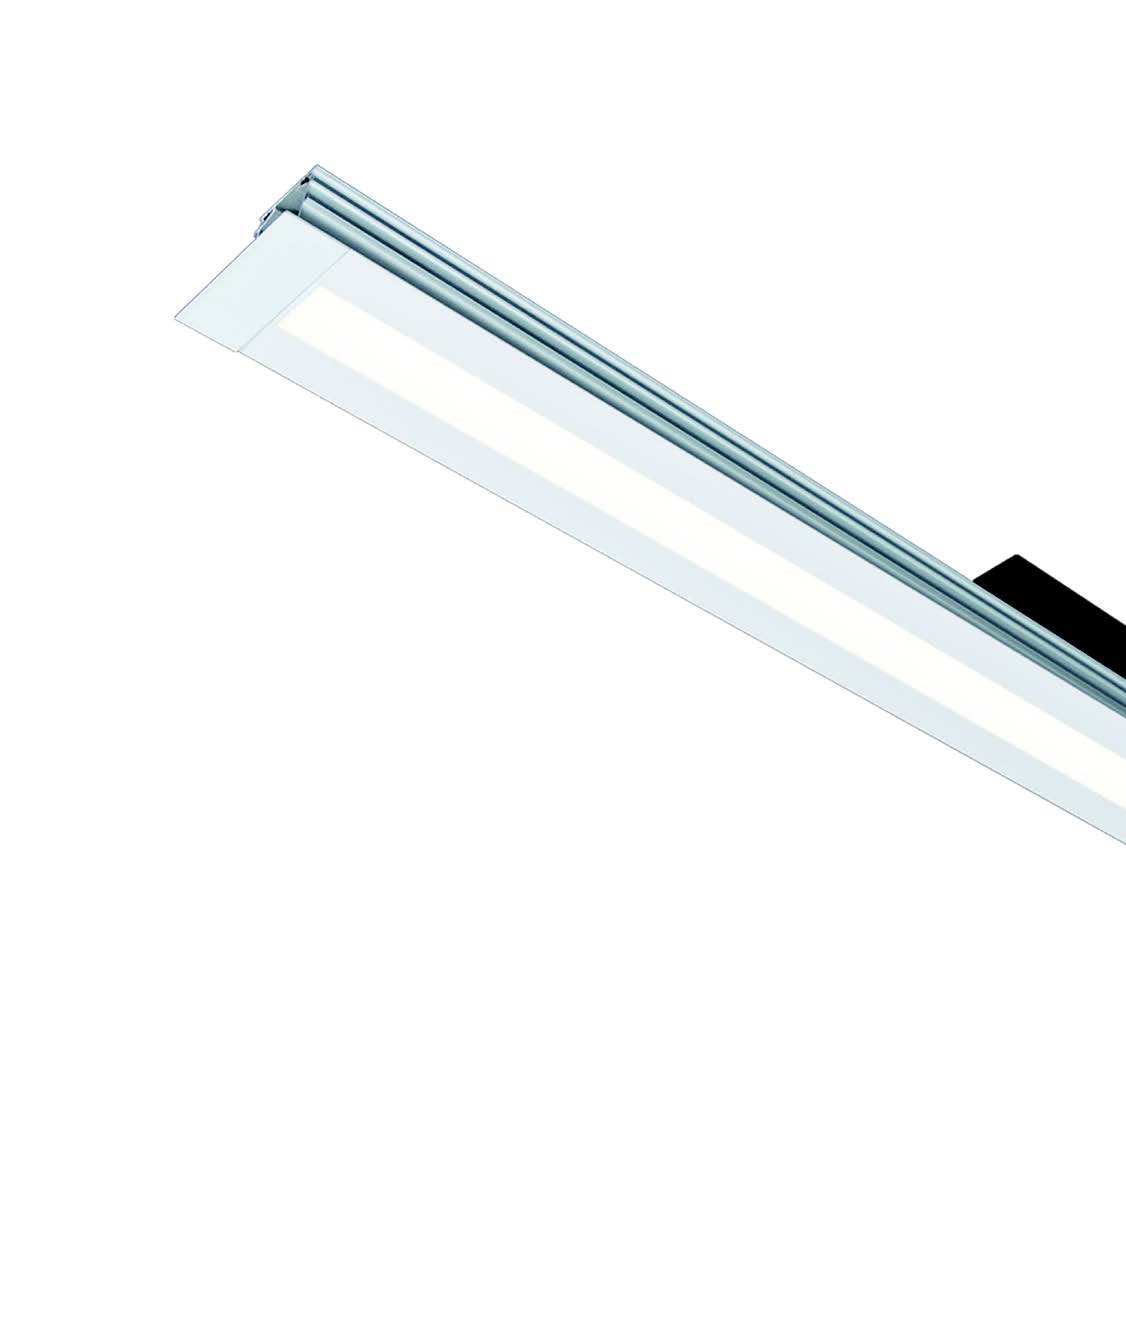 1.5" Wide LED Recessed Linear Light for Hard Ceilings (Sheetrock Only)